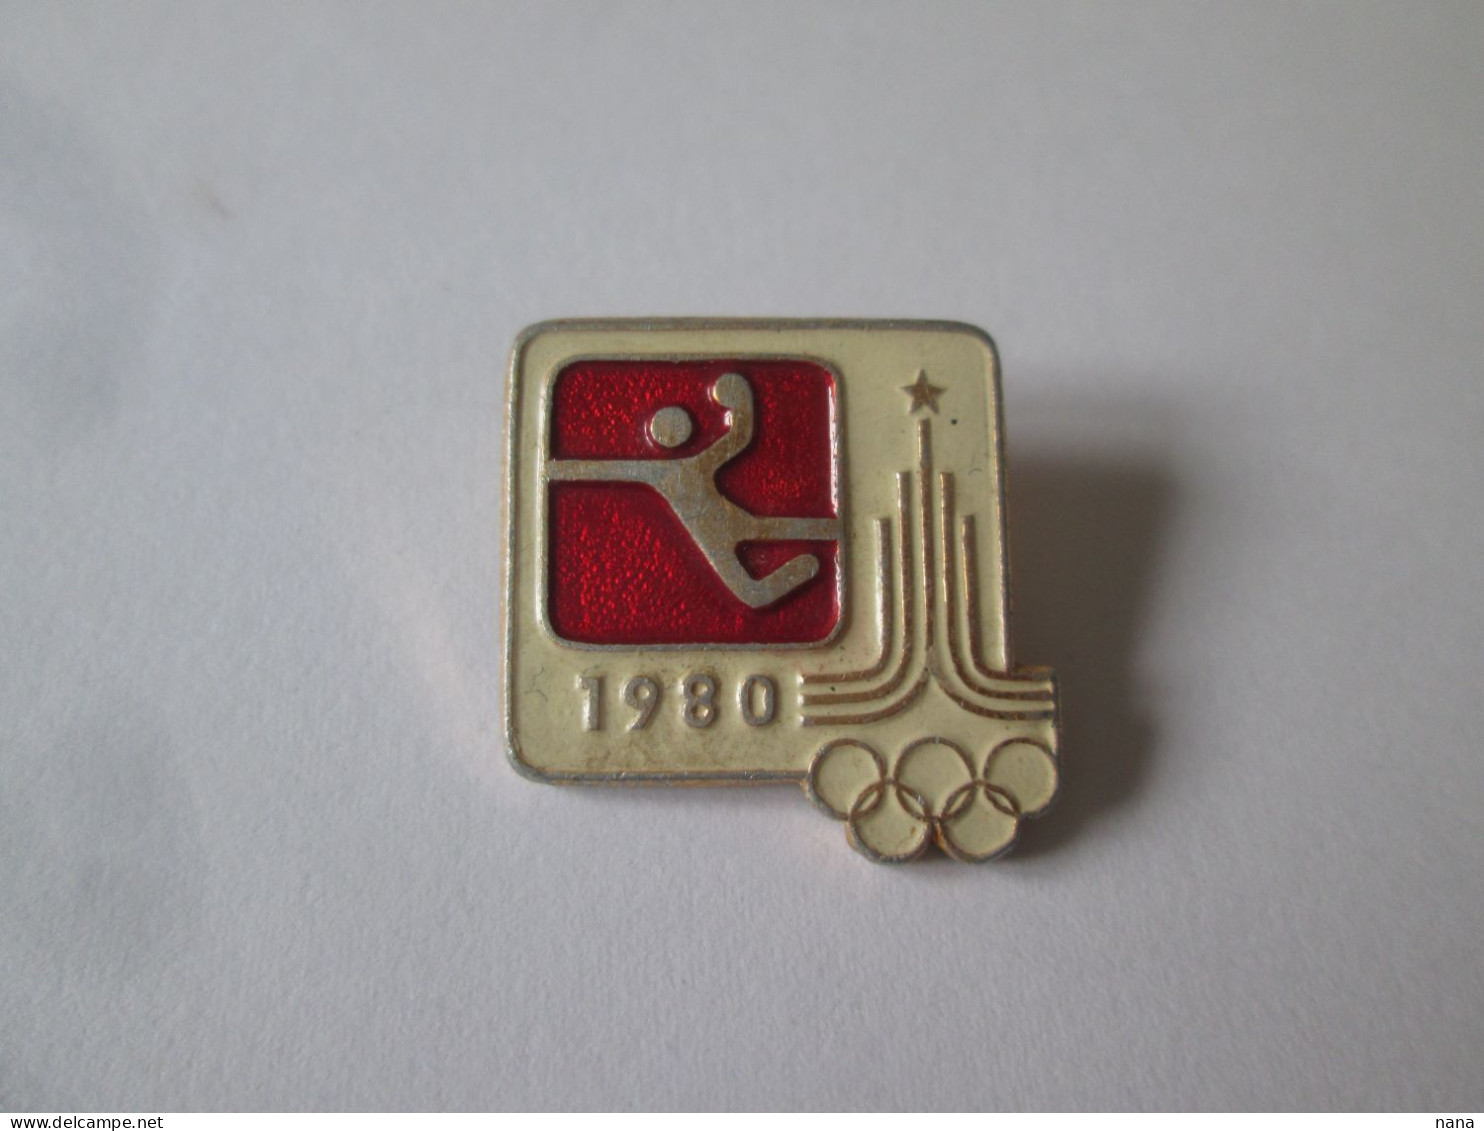 Insigne Russe Jeux Olympiques De Moscou 1980/Russian Badge Moscow Olympic Games 1980,size=22 X 22 Mm - Olympische Spiele